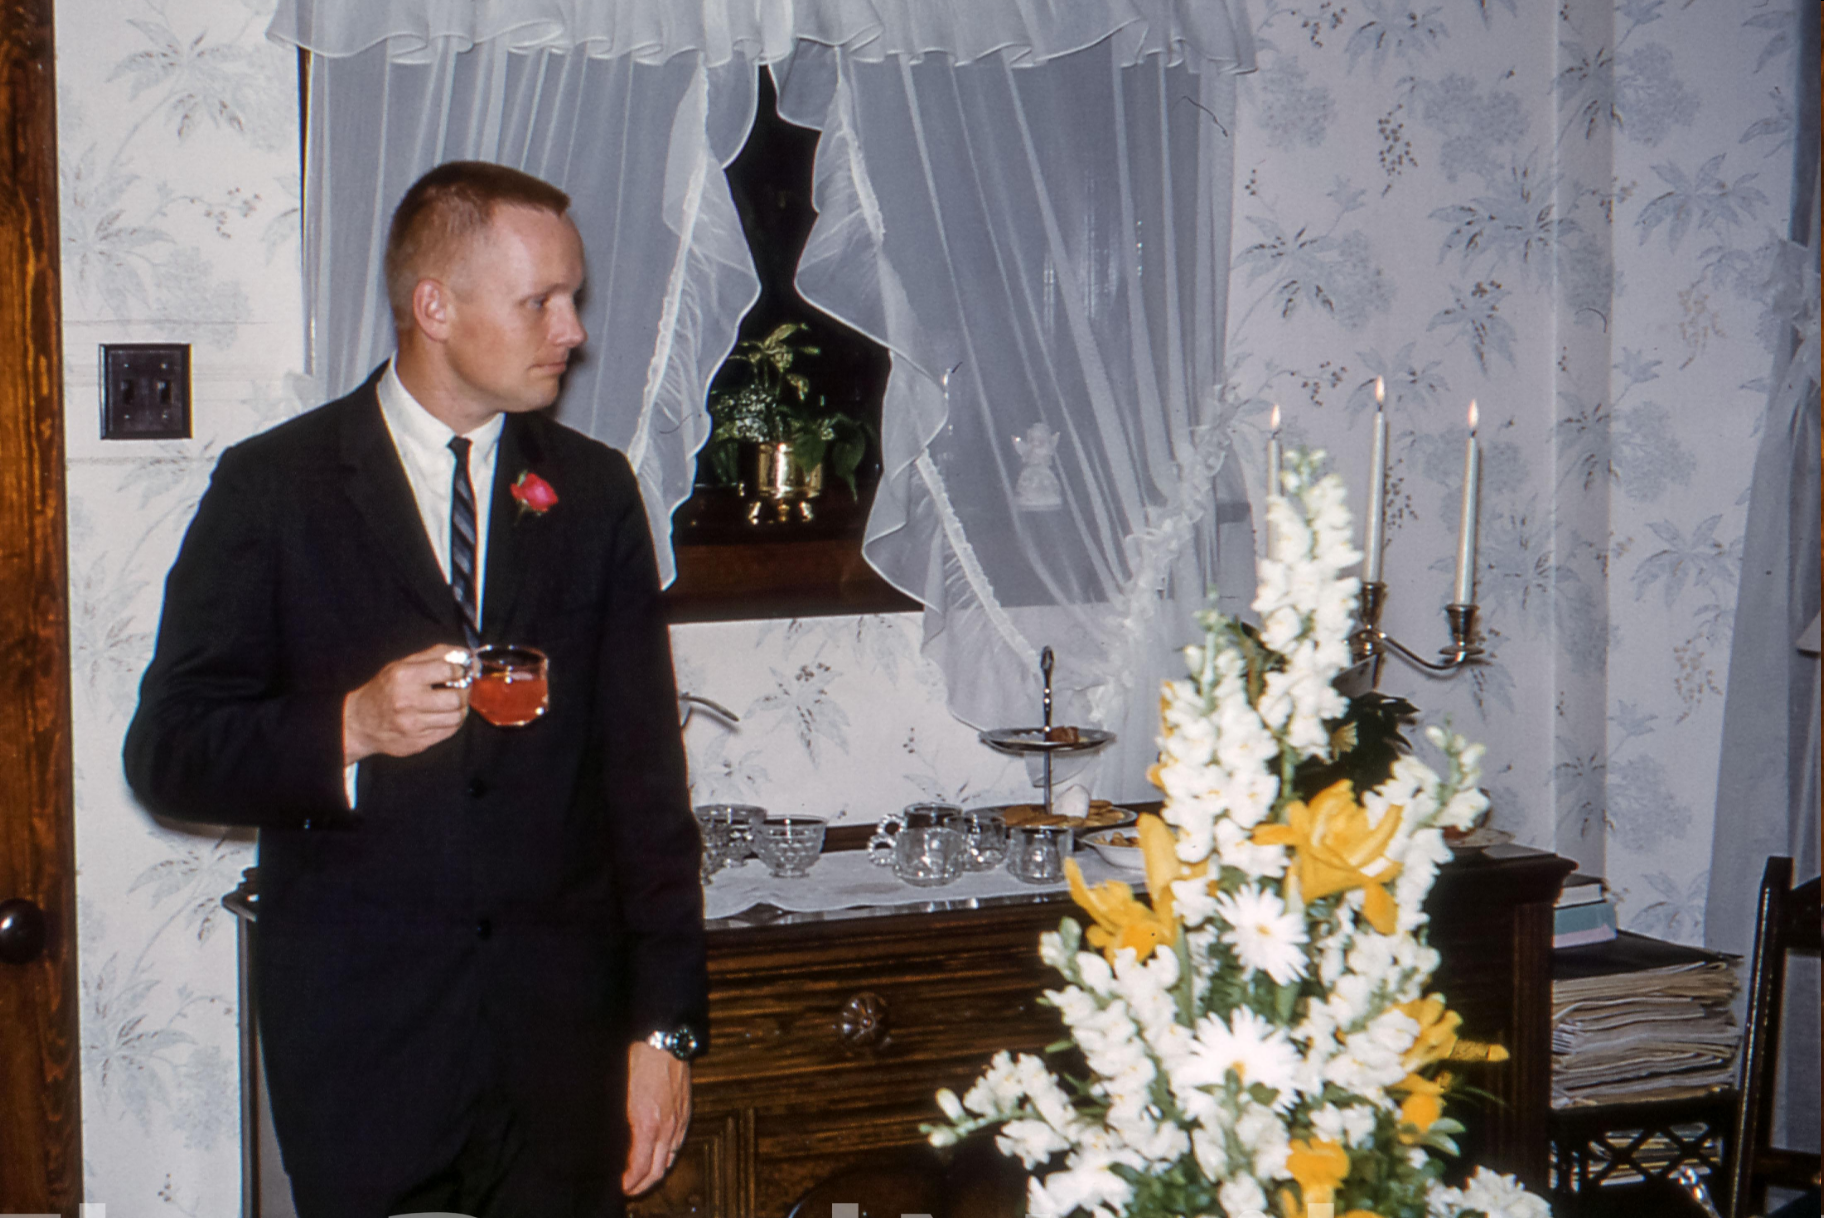 Neil Armstrong's mother snapped a photo of him standing alone at his homecoming from Gemini 8 (1966).png